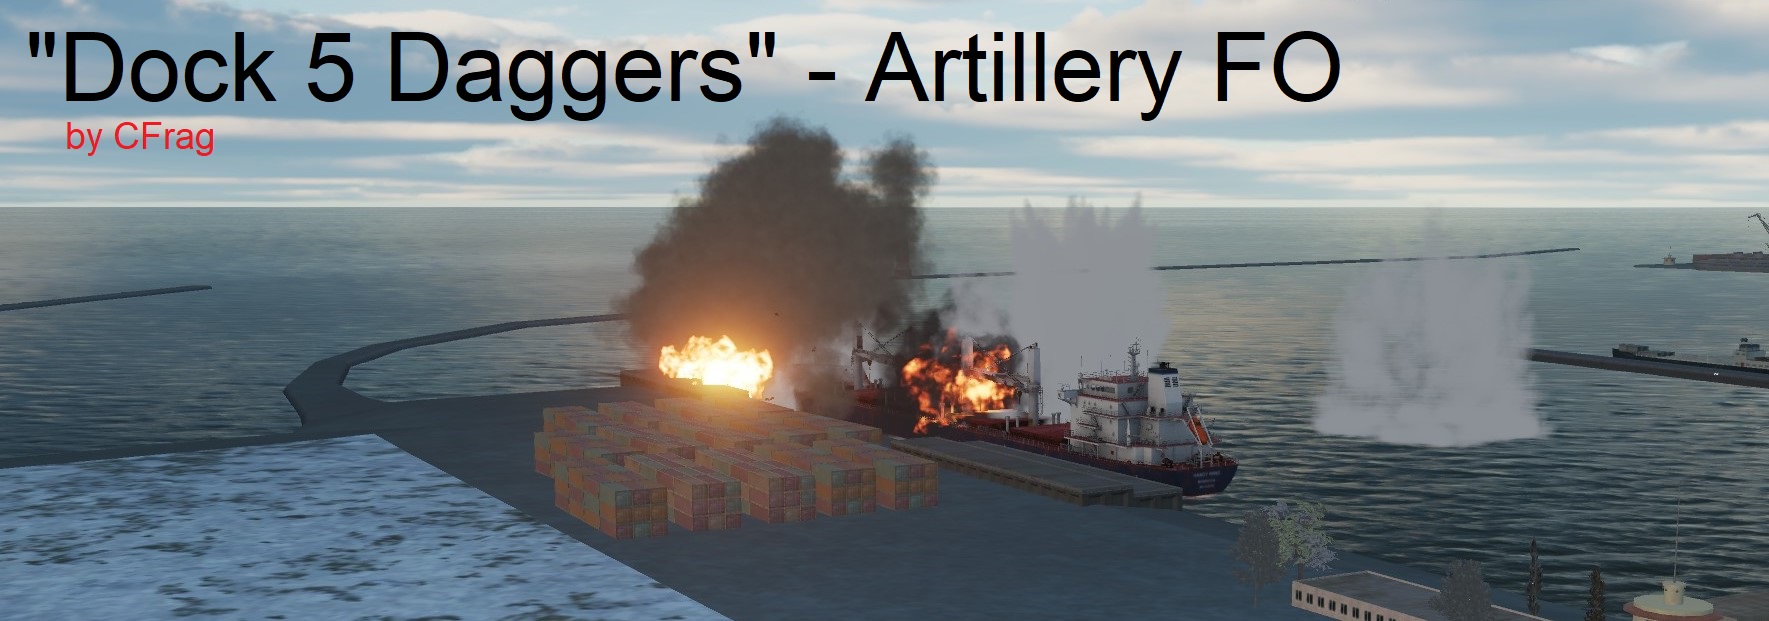 Dock 5 Daggers -- Attack Helicopter / Artillery FO (Single / COOP Multiplayer) -- Hind, Apache, Gazelle, Shark